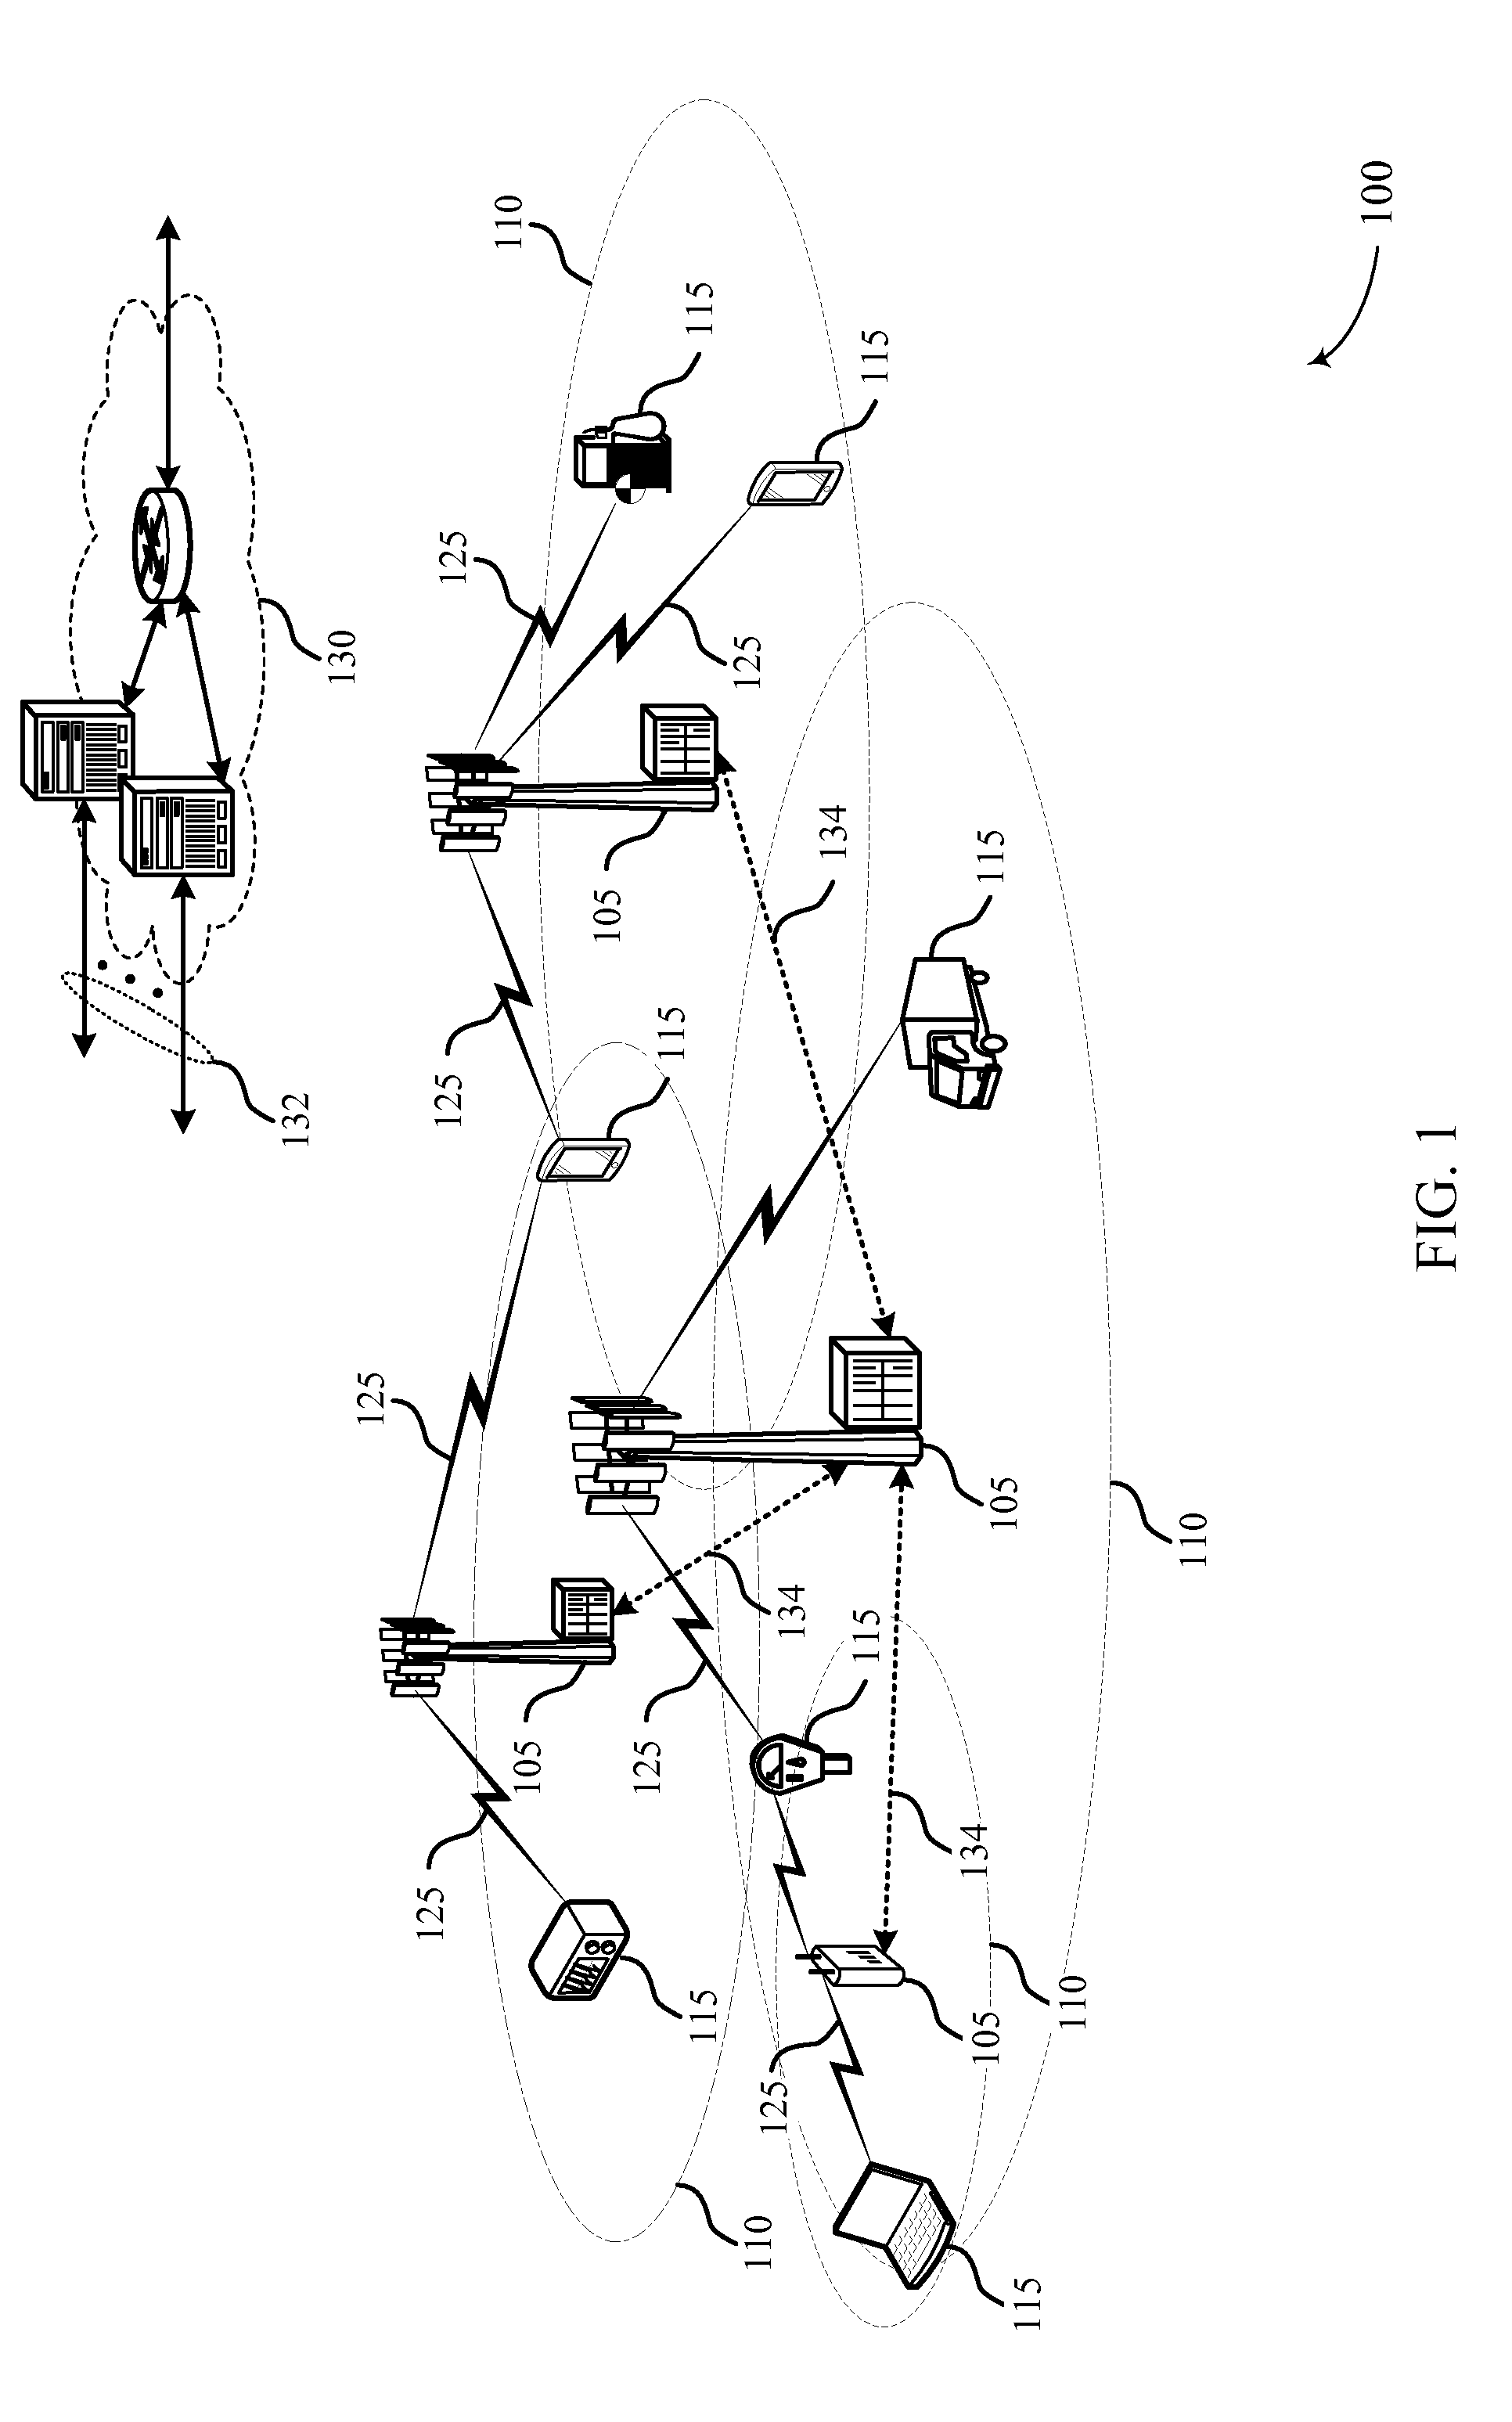 Flexible gaussian minimum shift keying in a cellular internet of things system